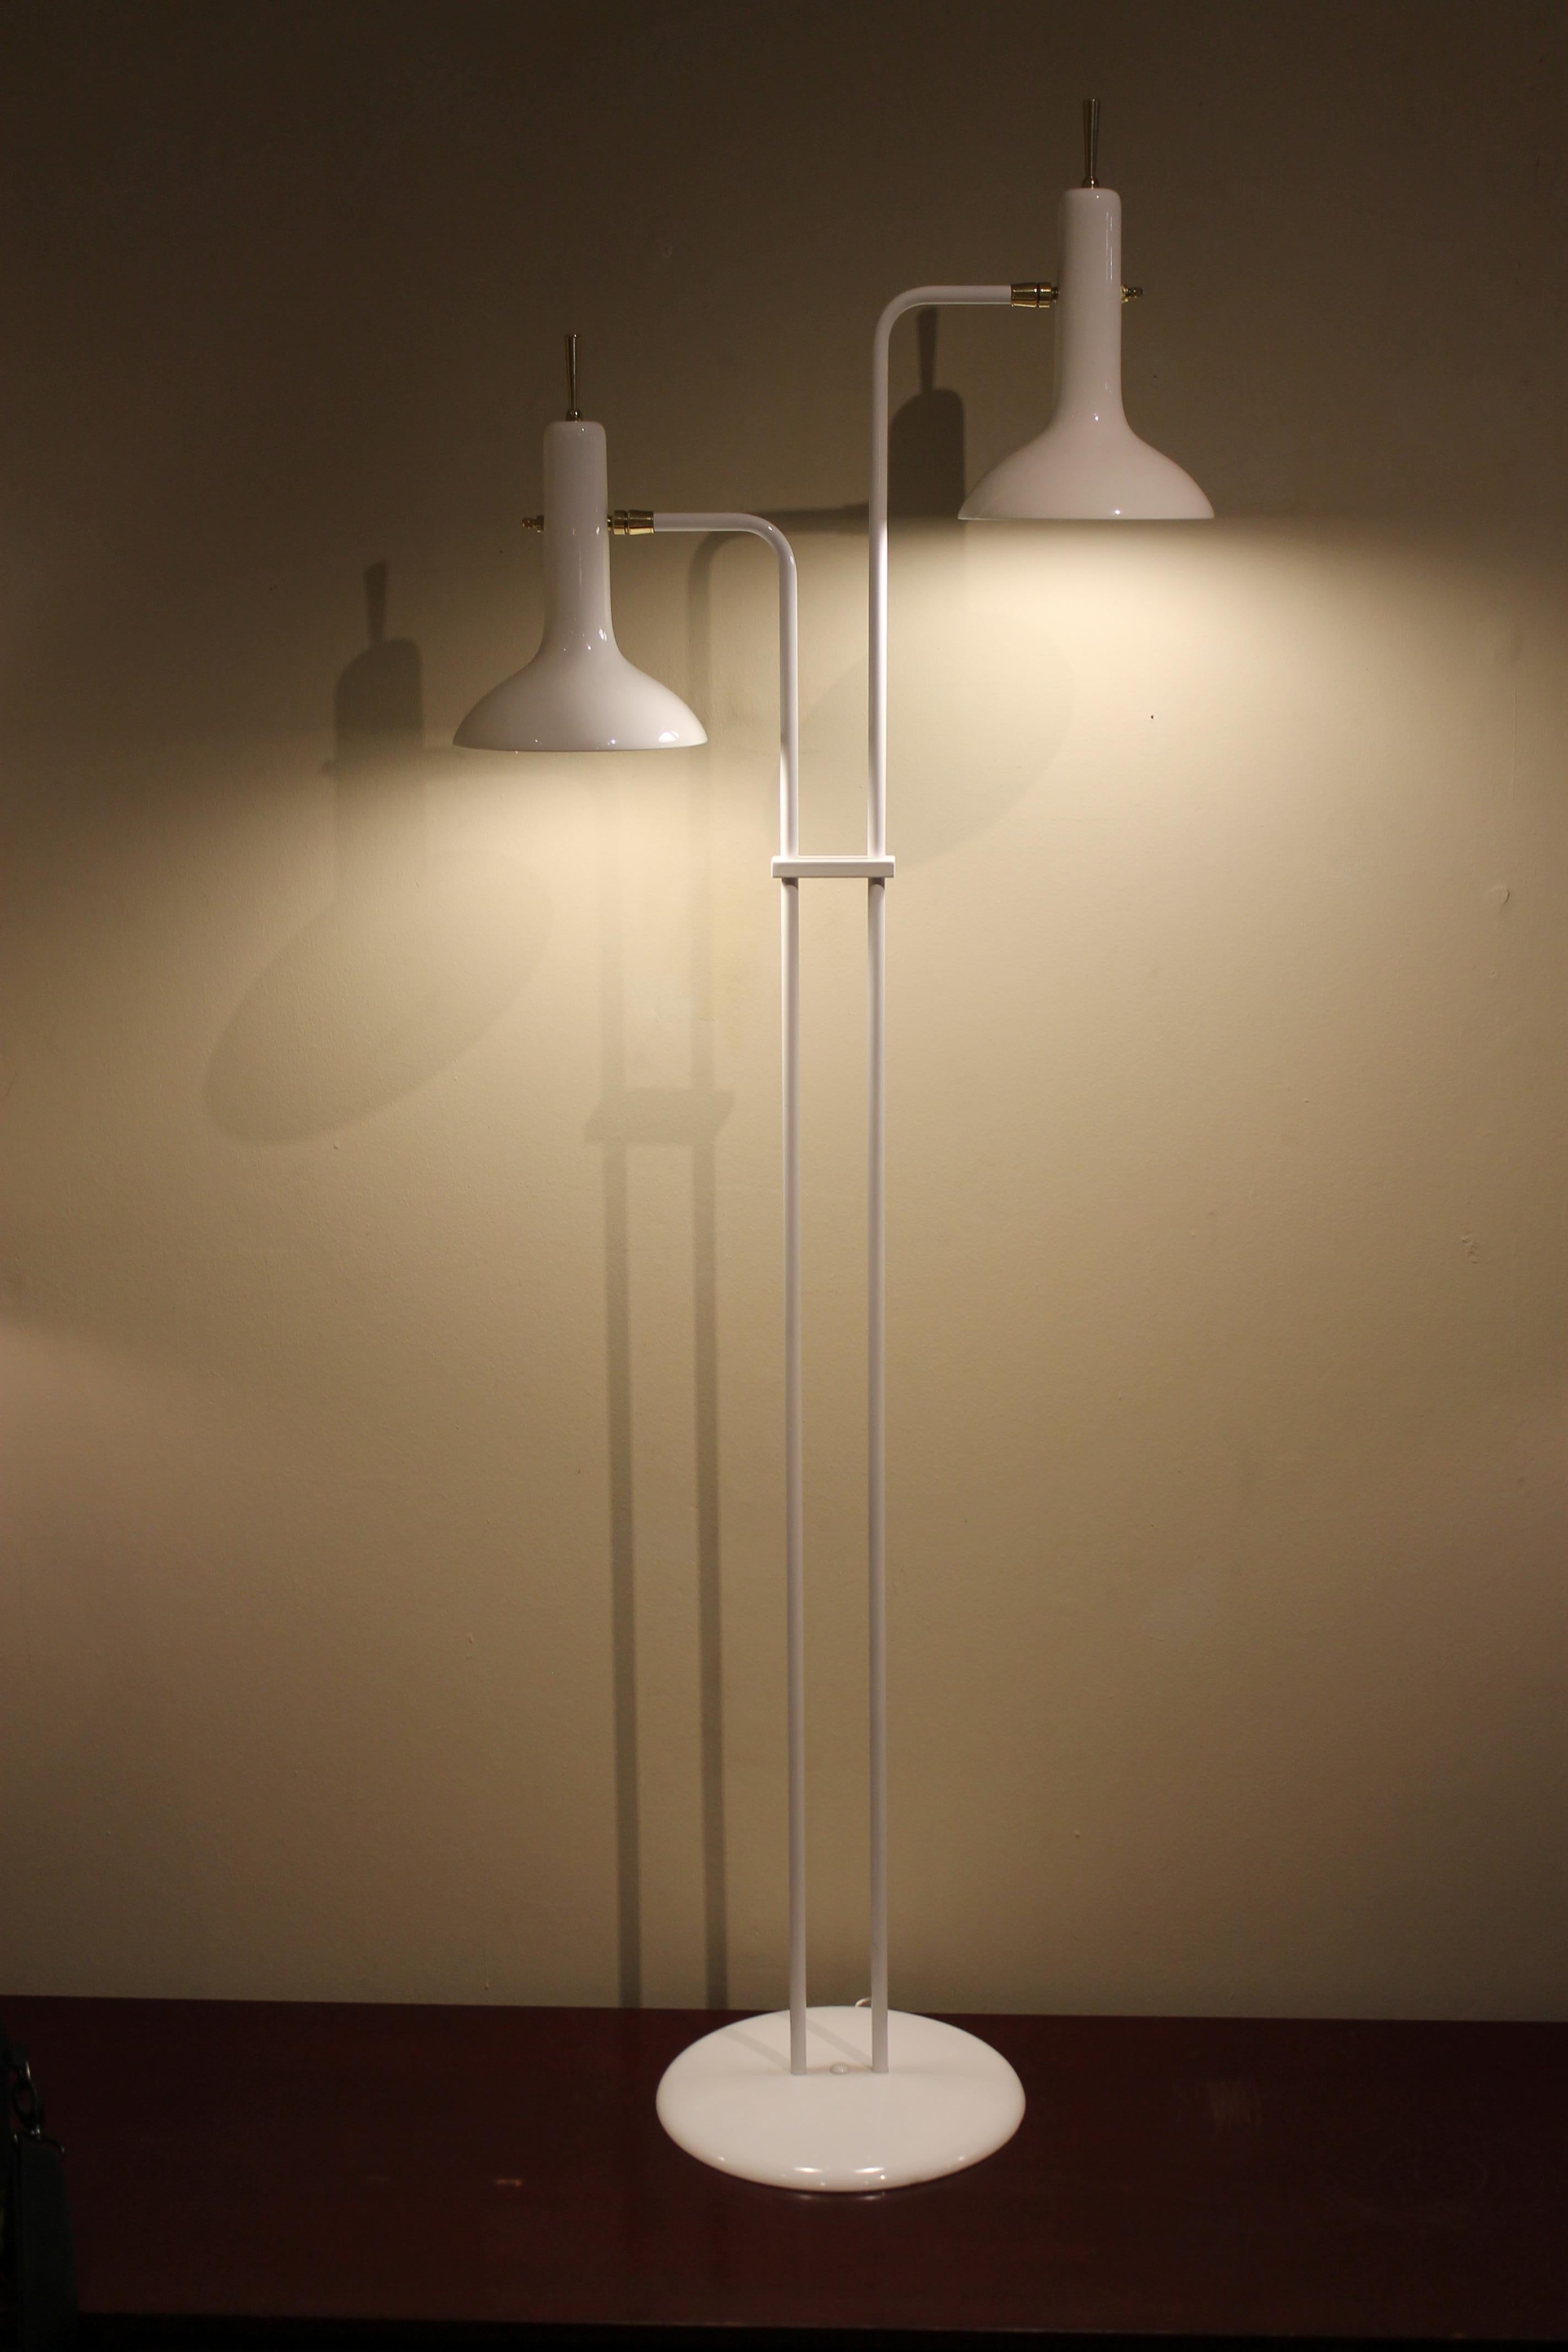 Laurel floor lamp has been updated by sand blasting and powder coating it white.  It’s been professionally rewired with the addition of new brass parts and finials to modernize it. Cones are 9” high and 7.25” diameter.  Base is 11.5” diameter. 